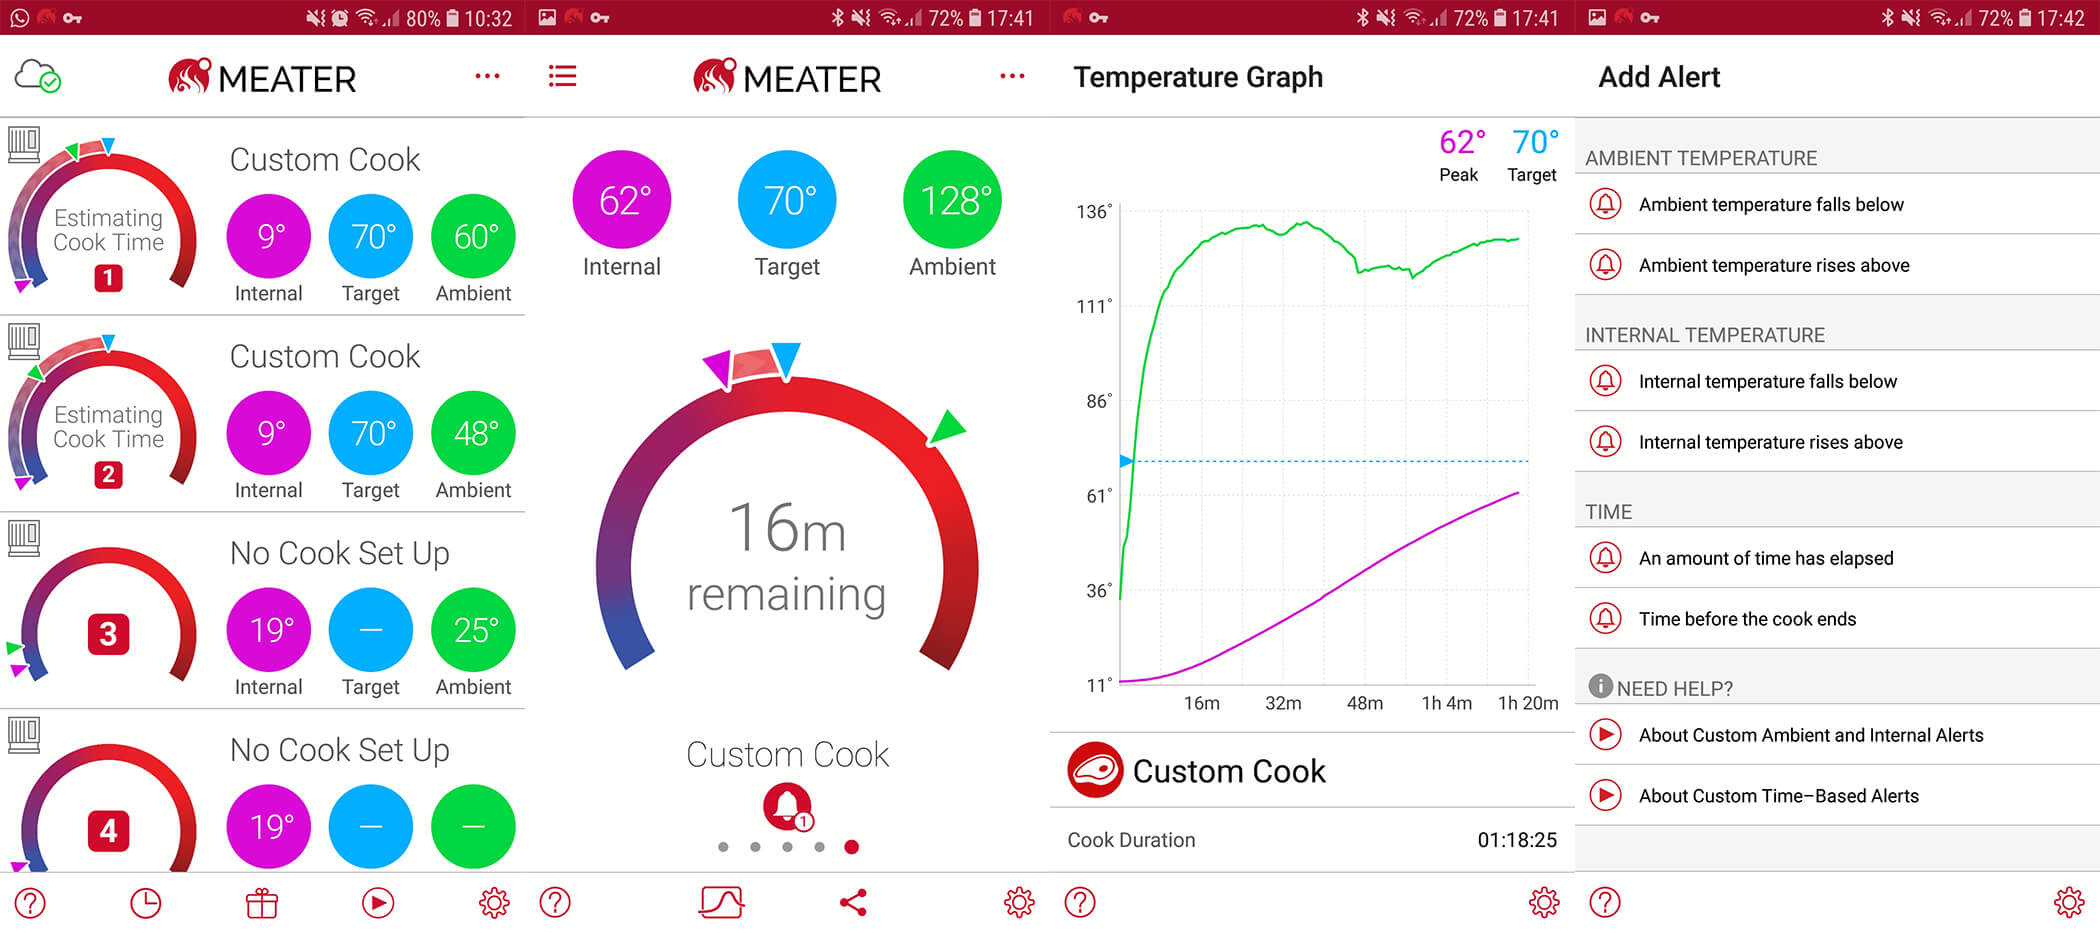 Review MEATER kernthermometer